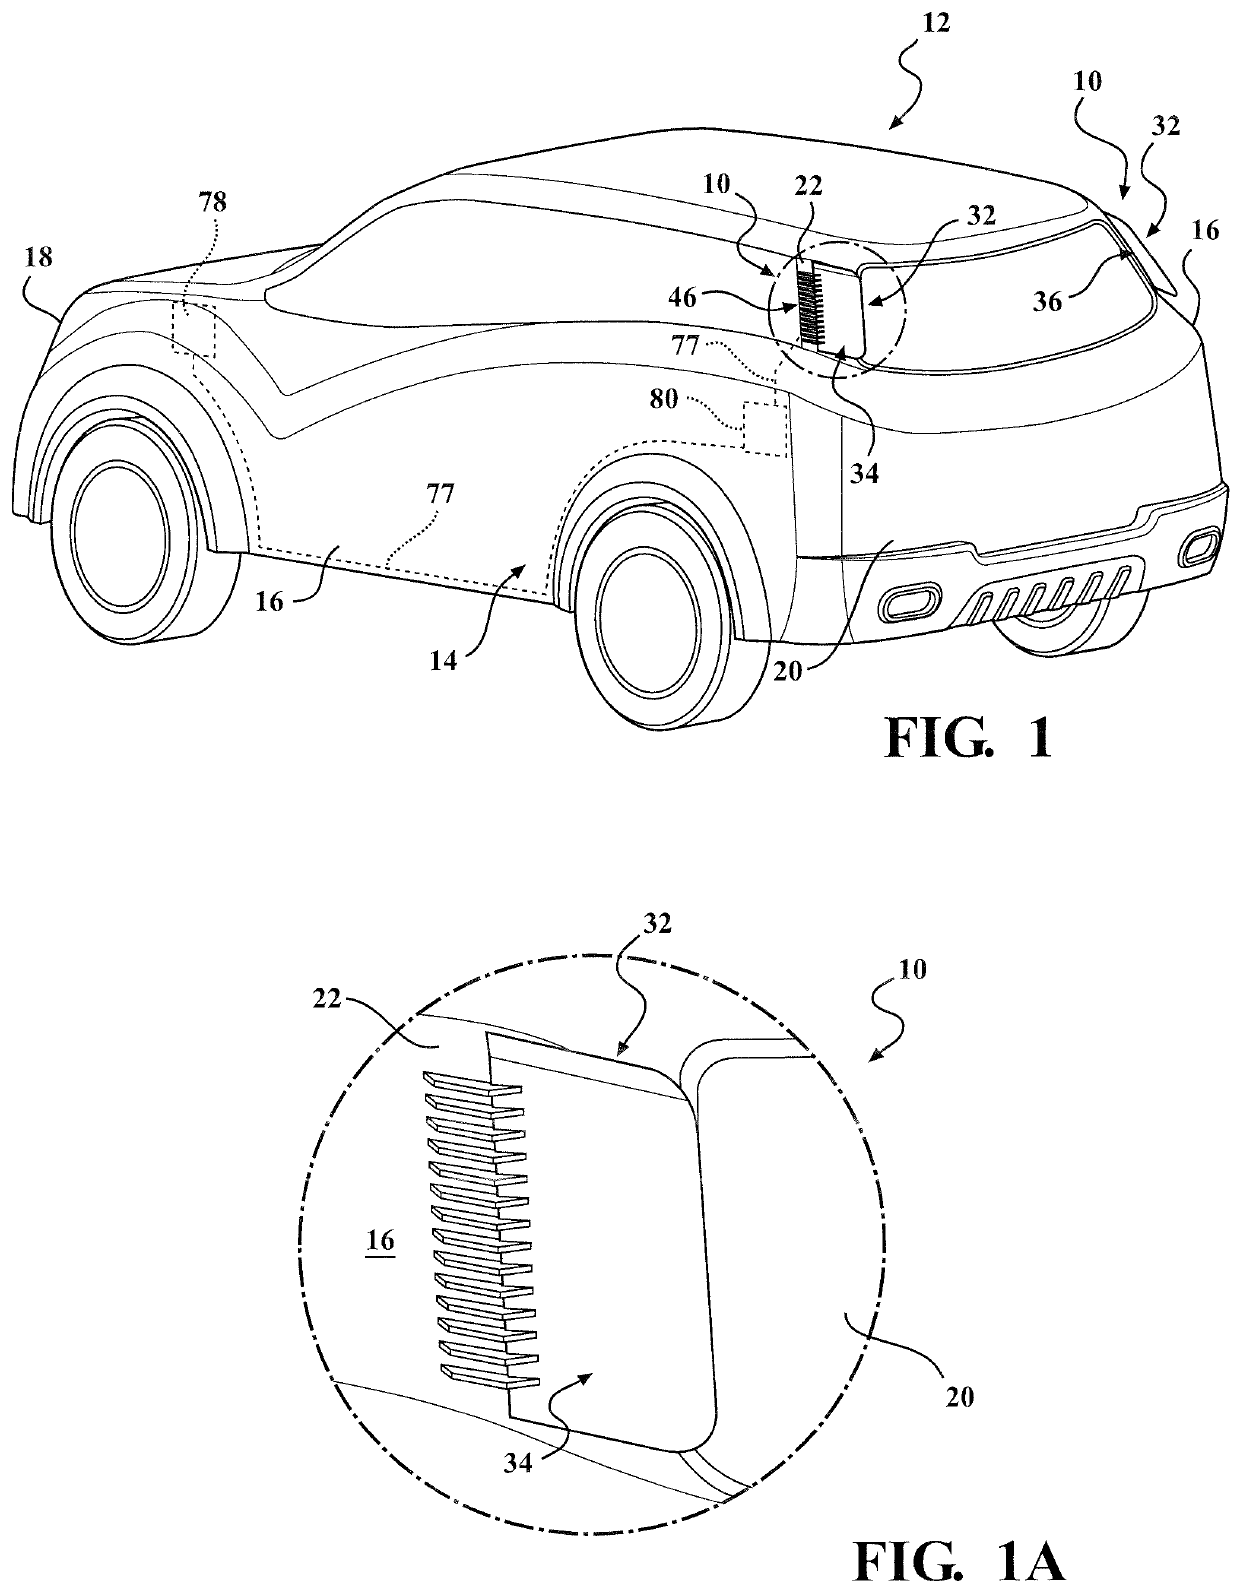 Applique with deployable aerodynamic surface